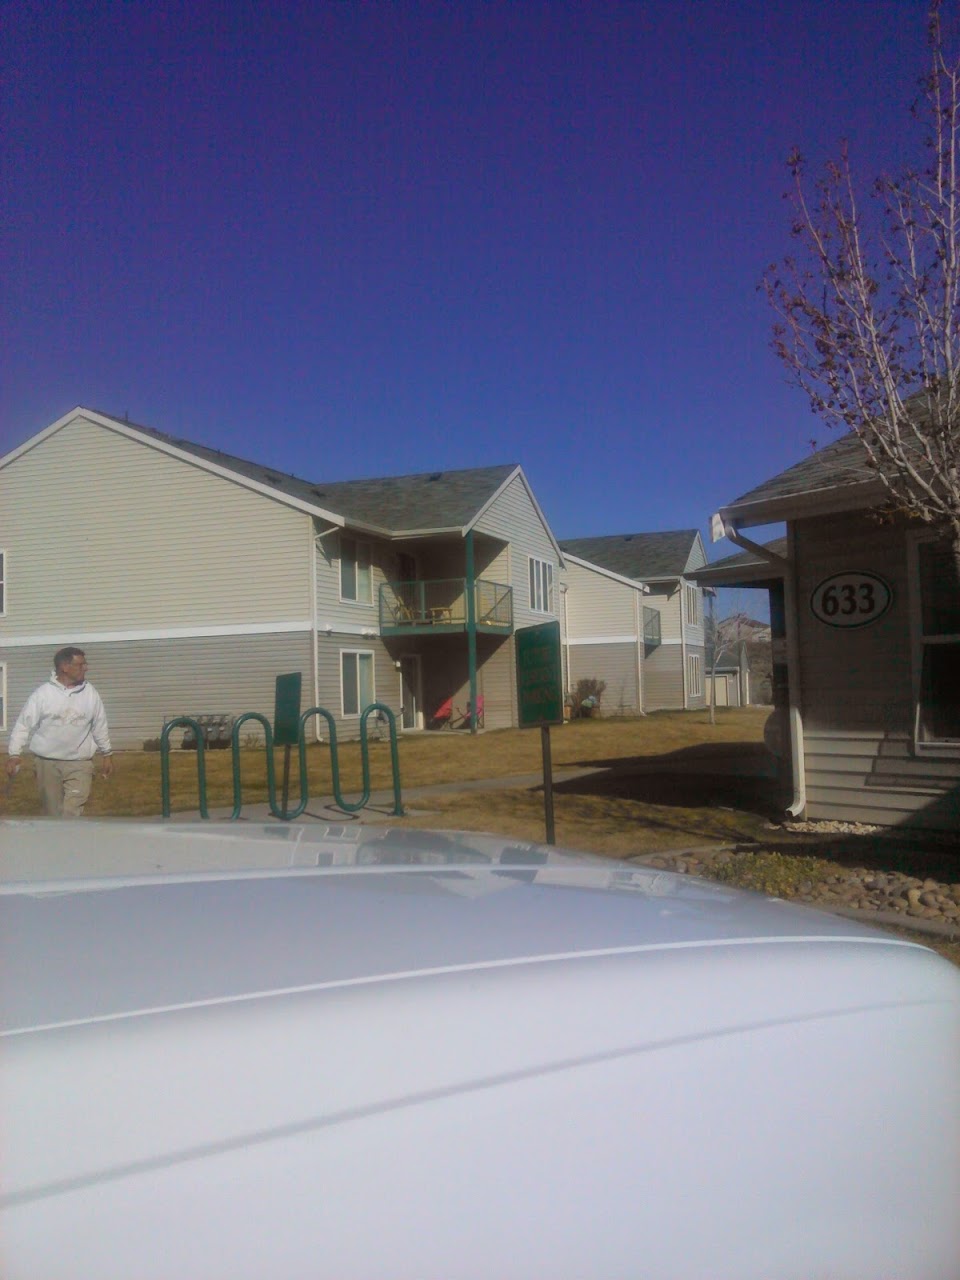 Photo of SIERRA SPRINGS APARTMENTS. Affordable housing located at 633 HOT SPRINGS RD. CARSON CITY, NV 89706